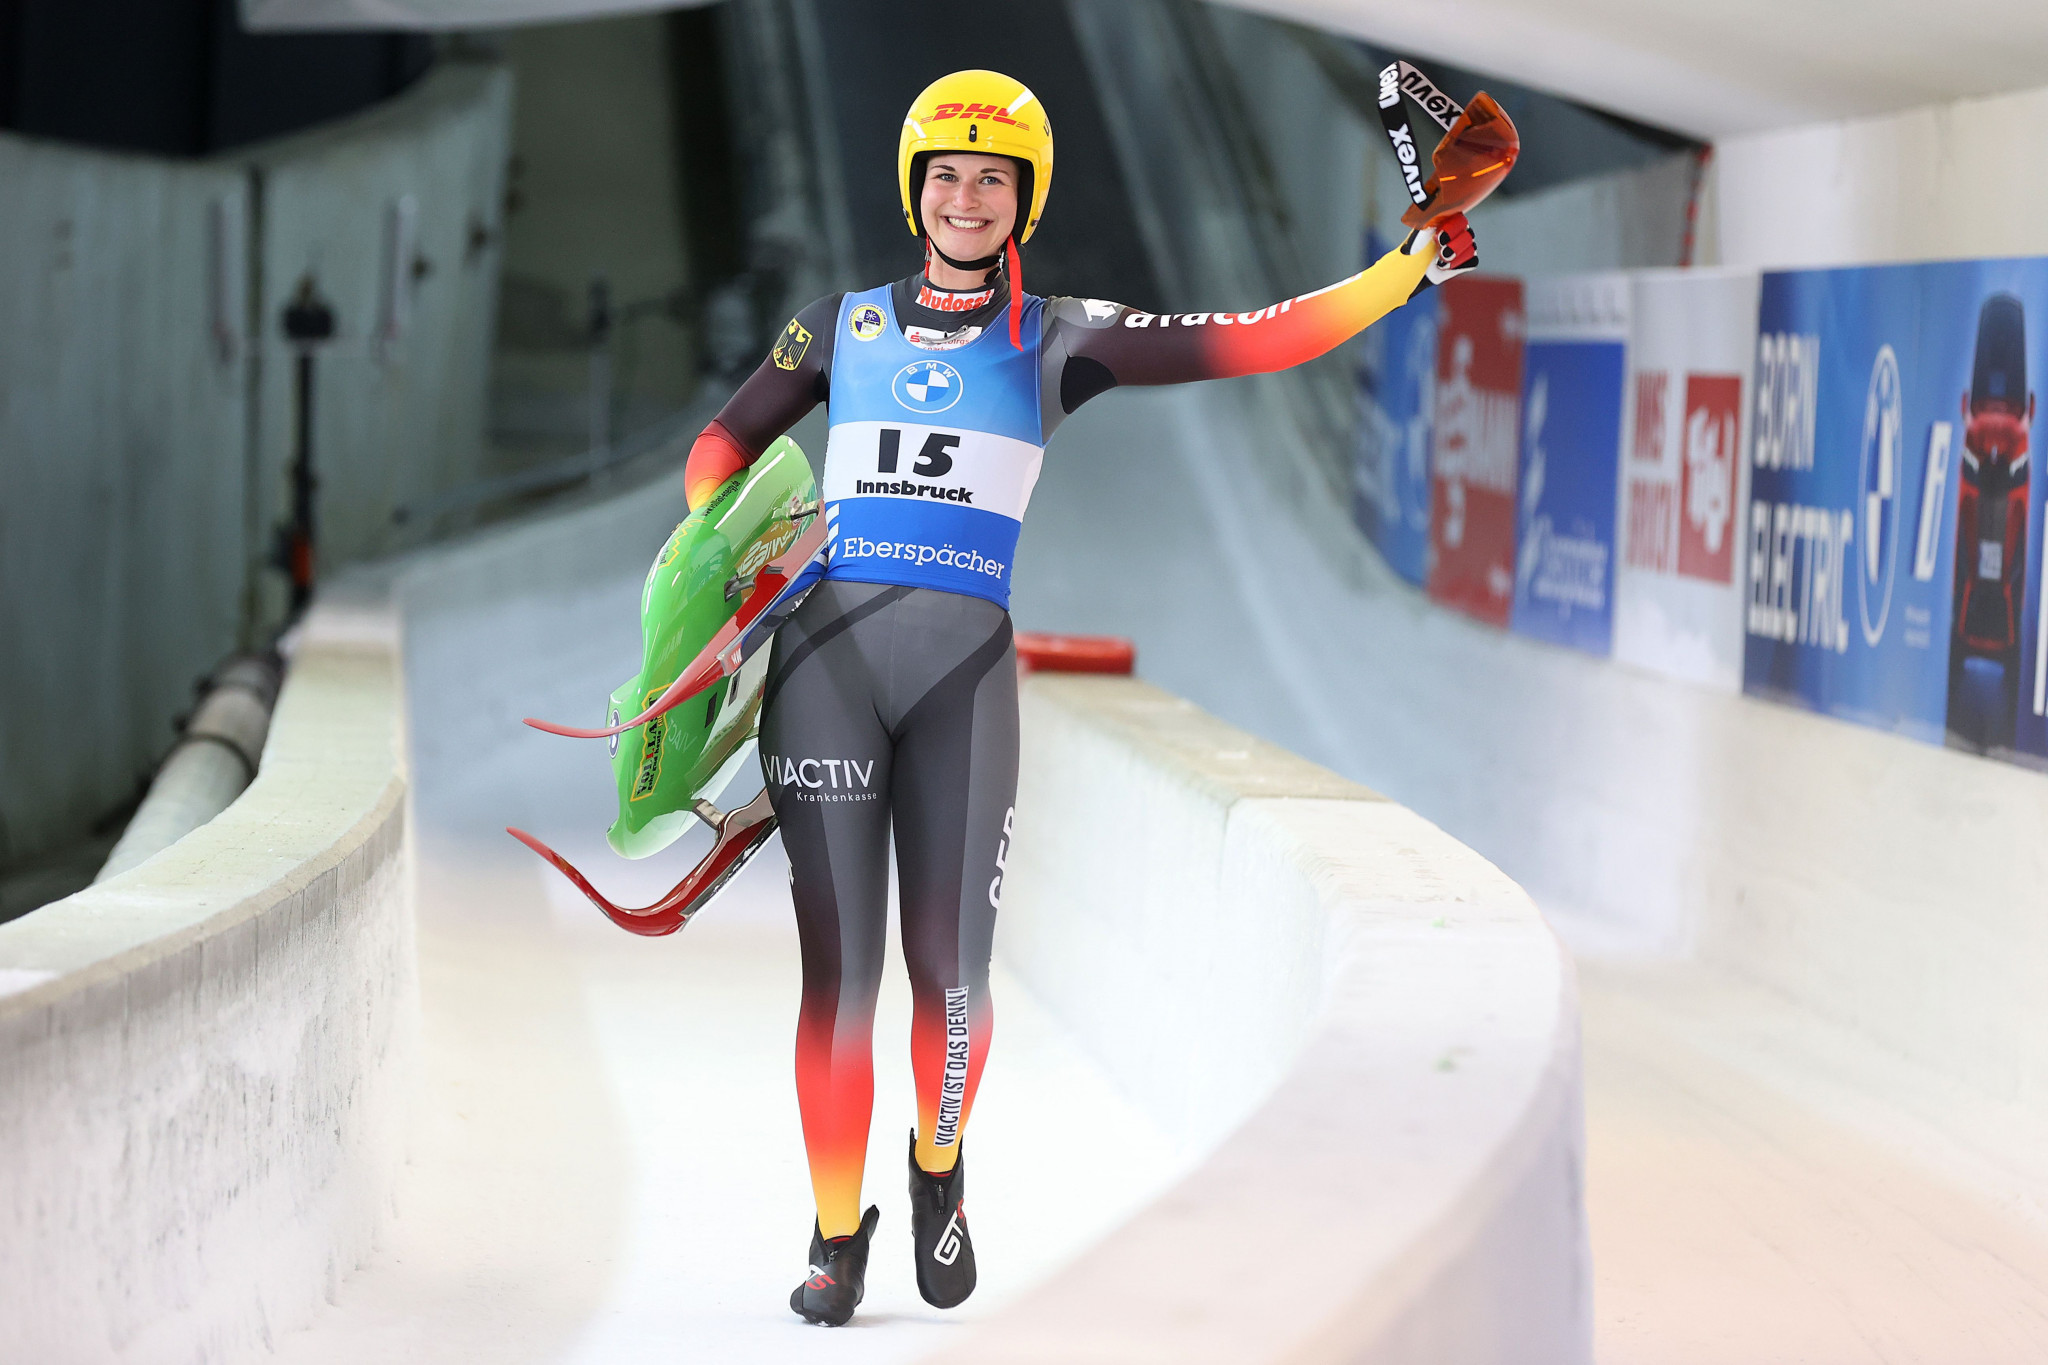 Taubitz targets further success at Luge World Cup in Altenberg